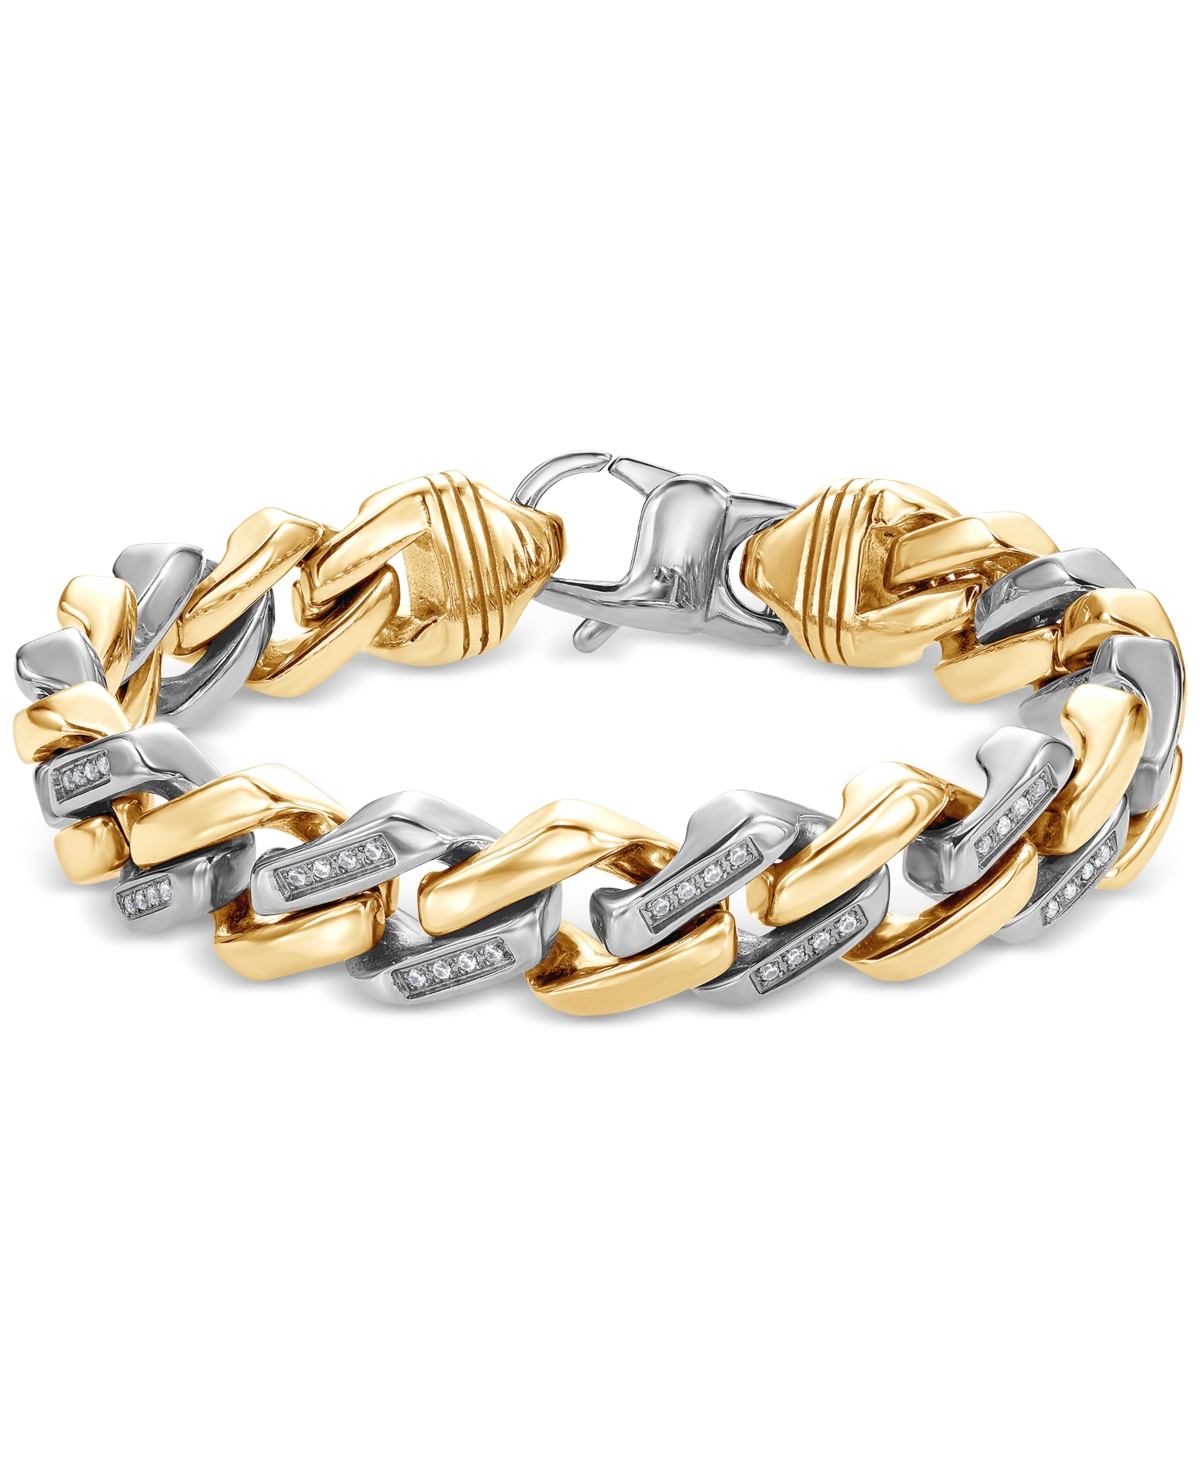 Men's Cubic Zirconia Two-Tone Monaco Link Bracelet in Stainless Steel & Gold-Tone Ion-Plate - Gold-Tone